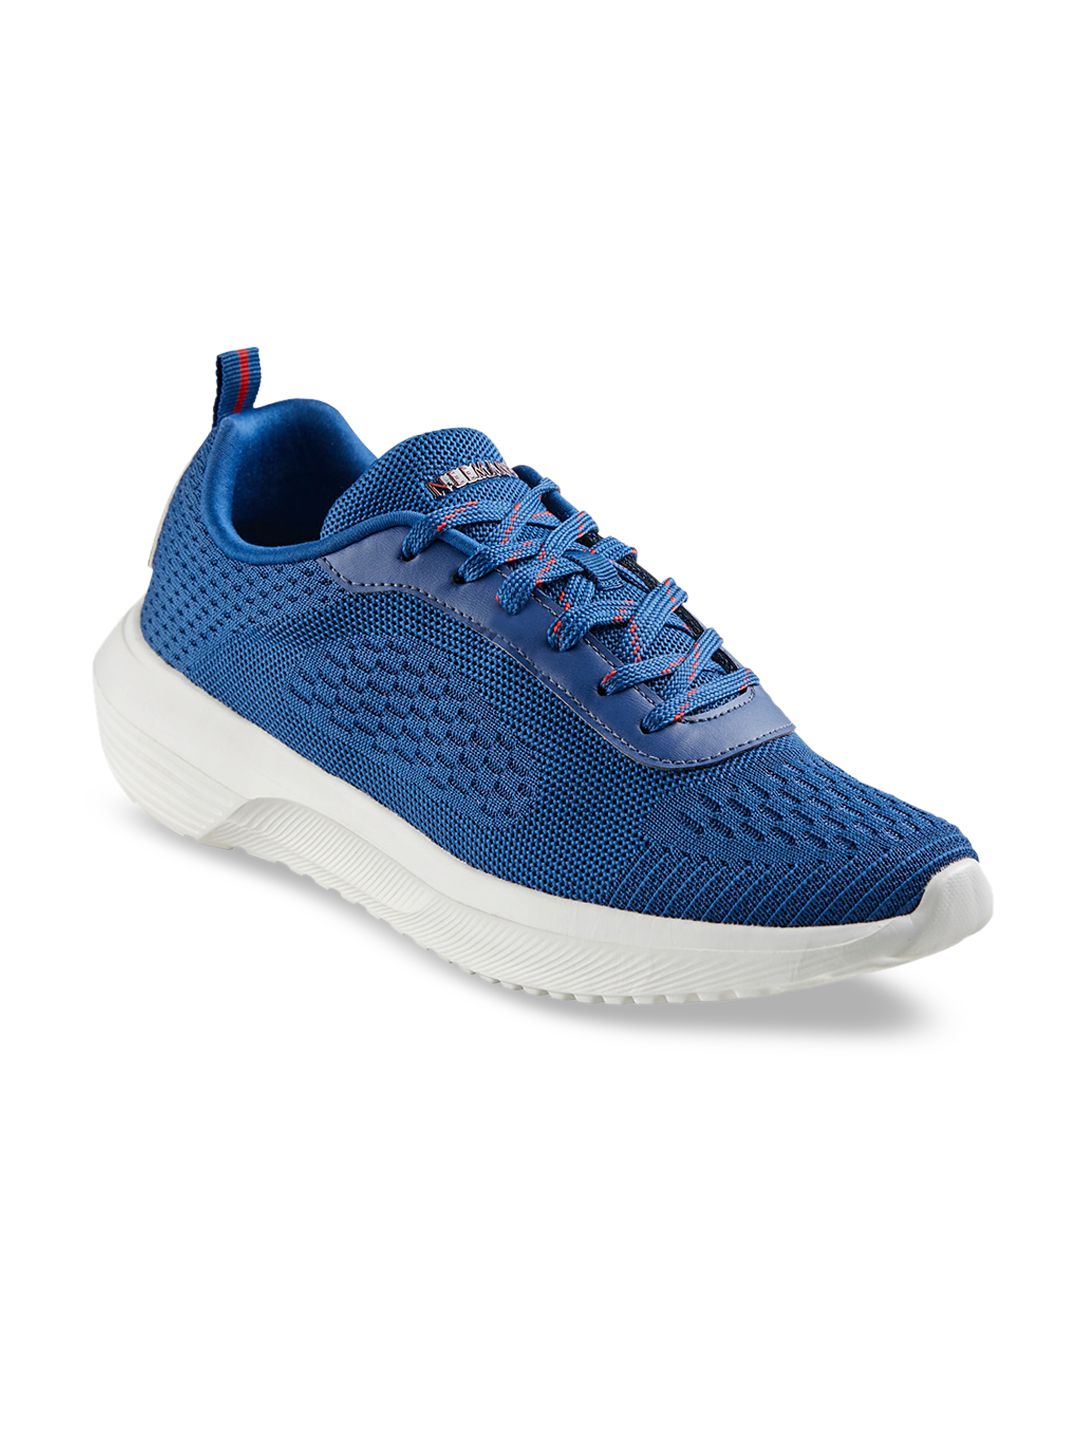 NEEMANS Woven Design Lace-Up Sneakers Price in India